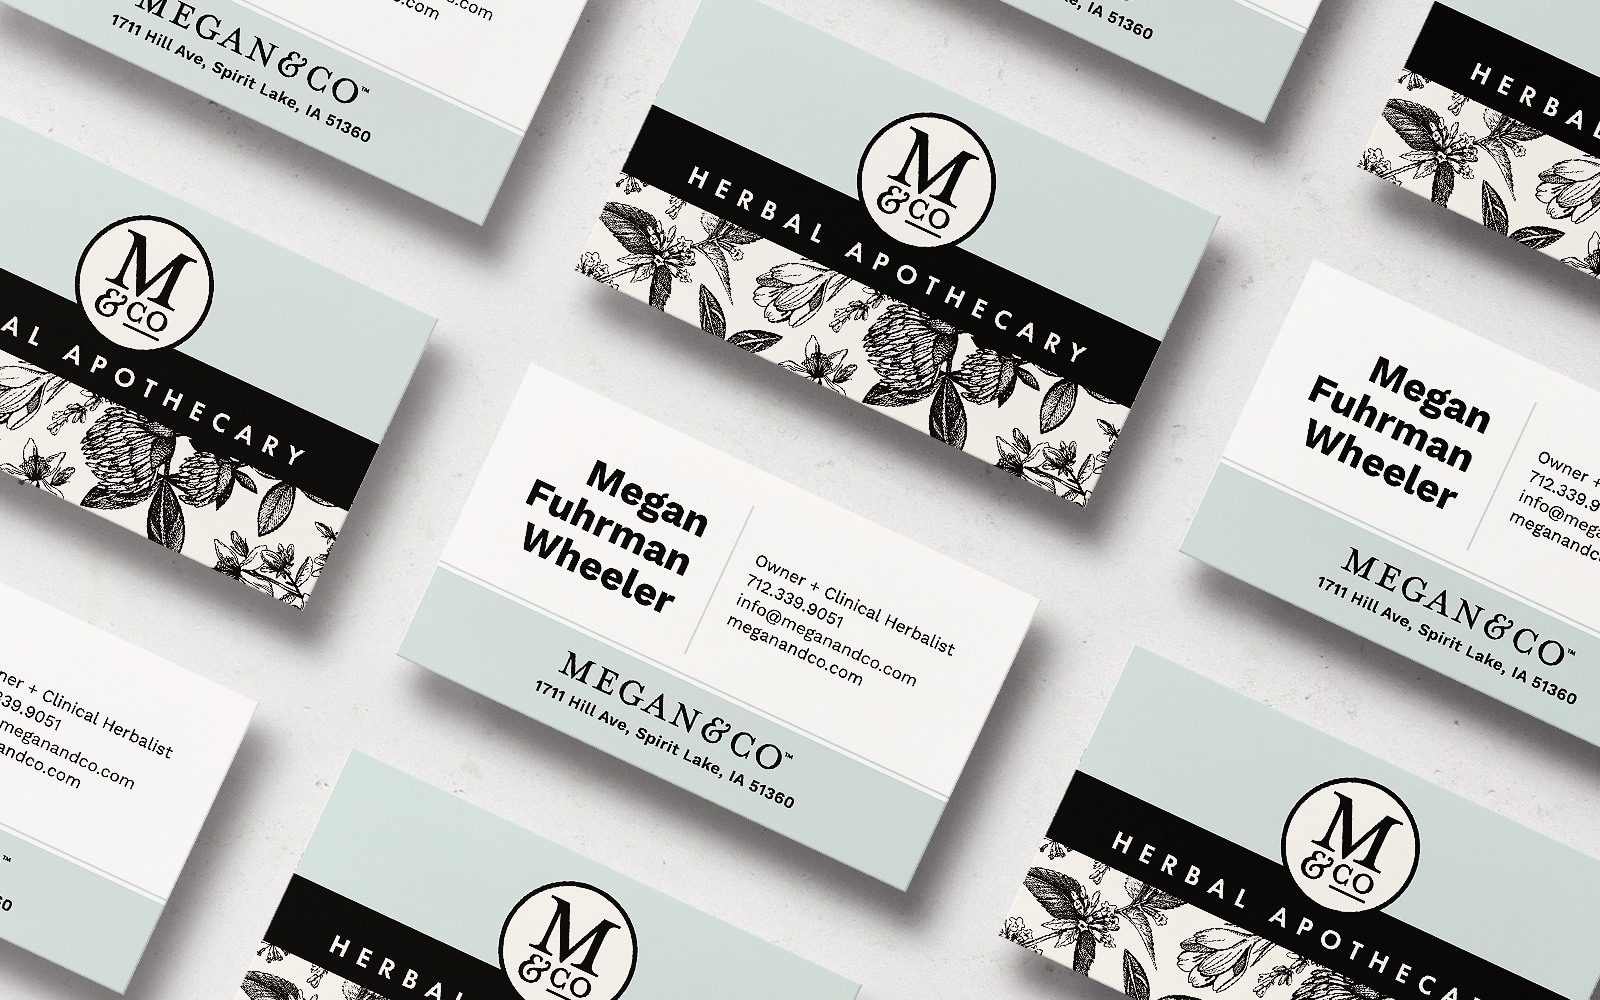 Megan Co the Herbal Apothecary business cards in black, white, and dusty blue with floral illustrations and a monogrammed "M & Co.